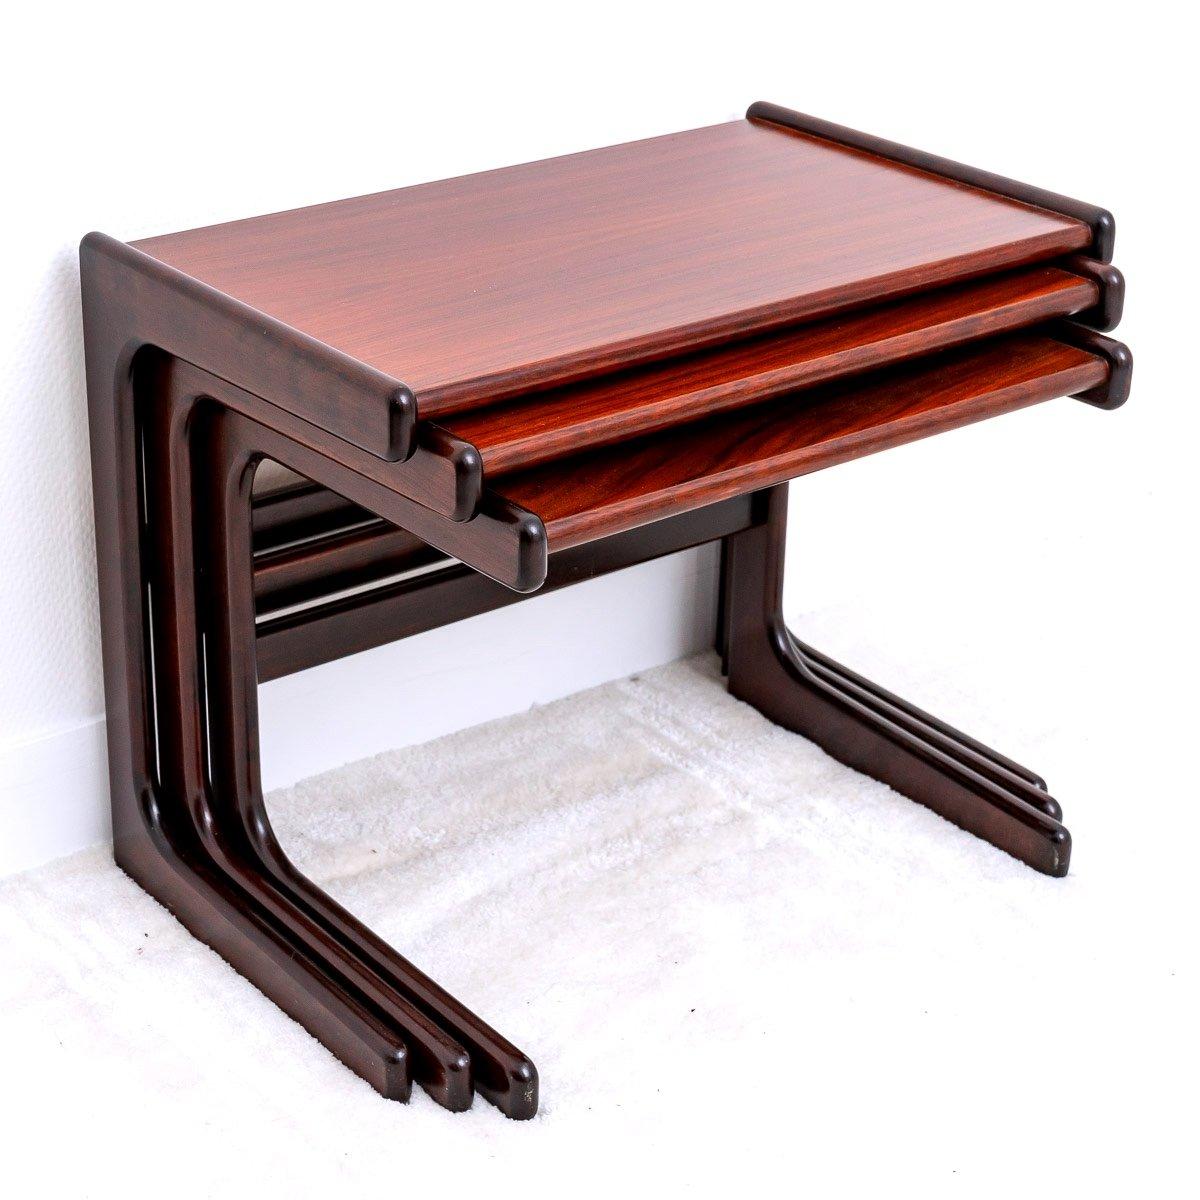 Beautiful modern set of three nesting tables in rosewood. The legs are in solid rosewood and the tops in rosewood veneer.

The tables have the shape of the letter 